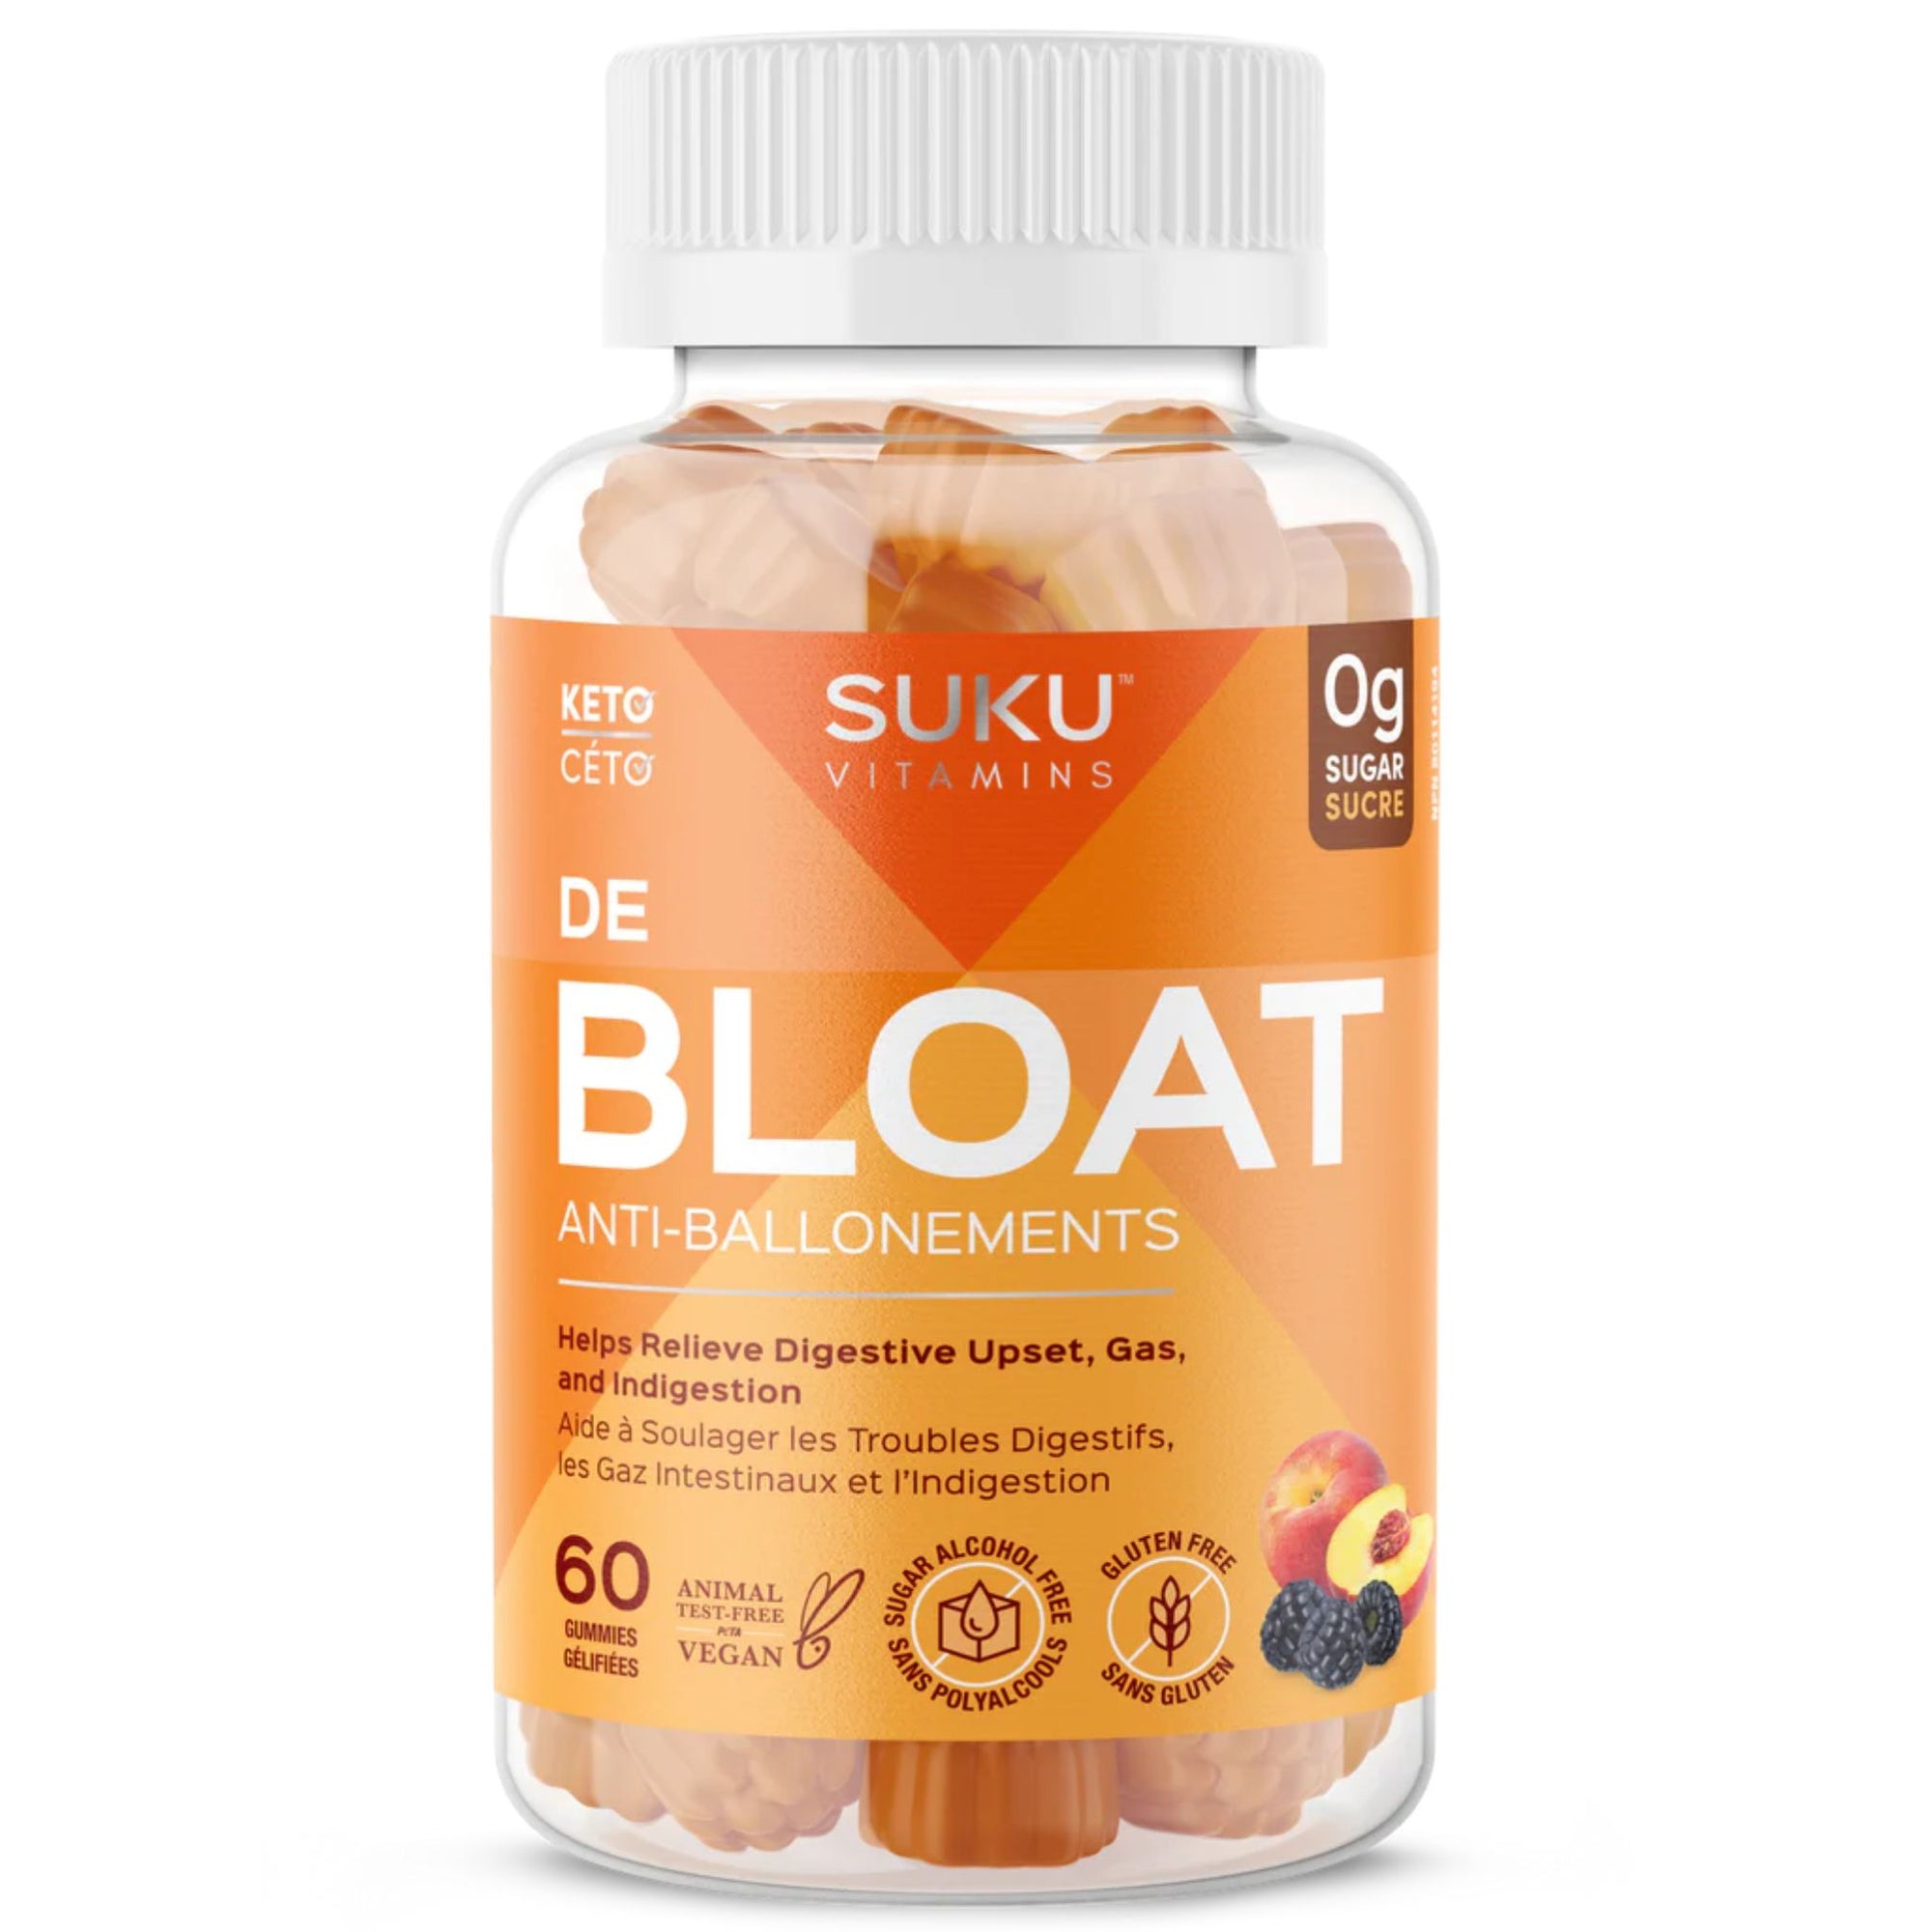 Suku De-Bloat 60 Gummies in a bottle - Helps relieve digestive upset, gas, and indigestion. 